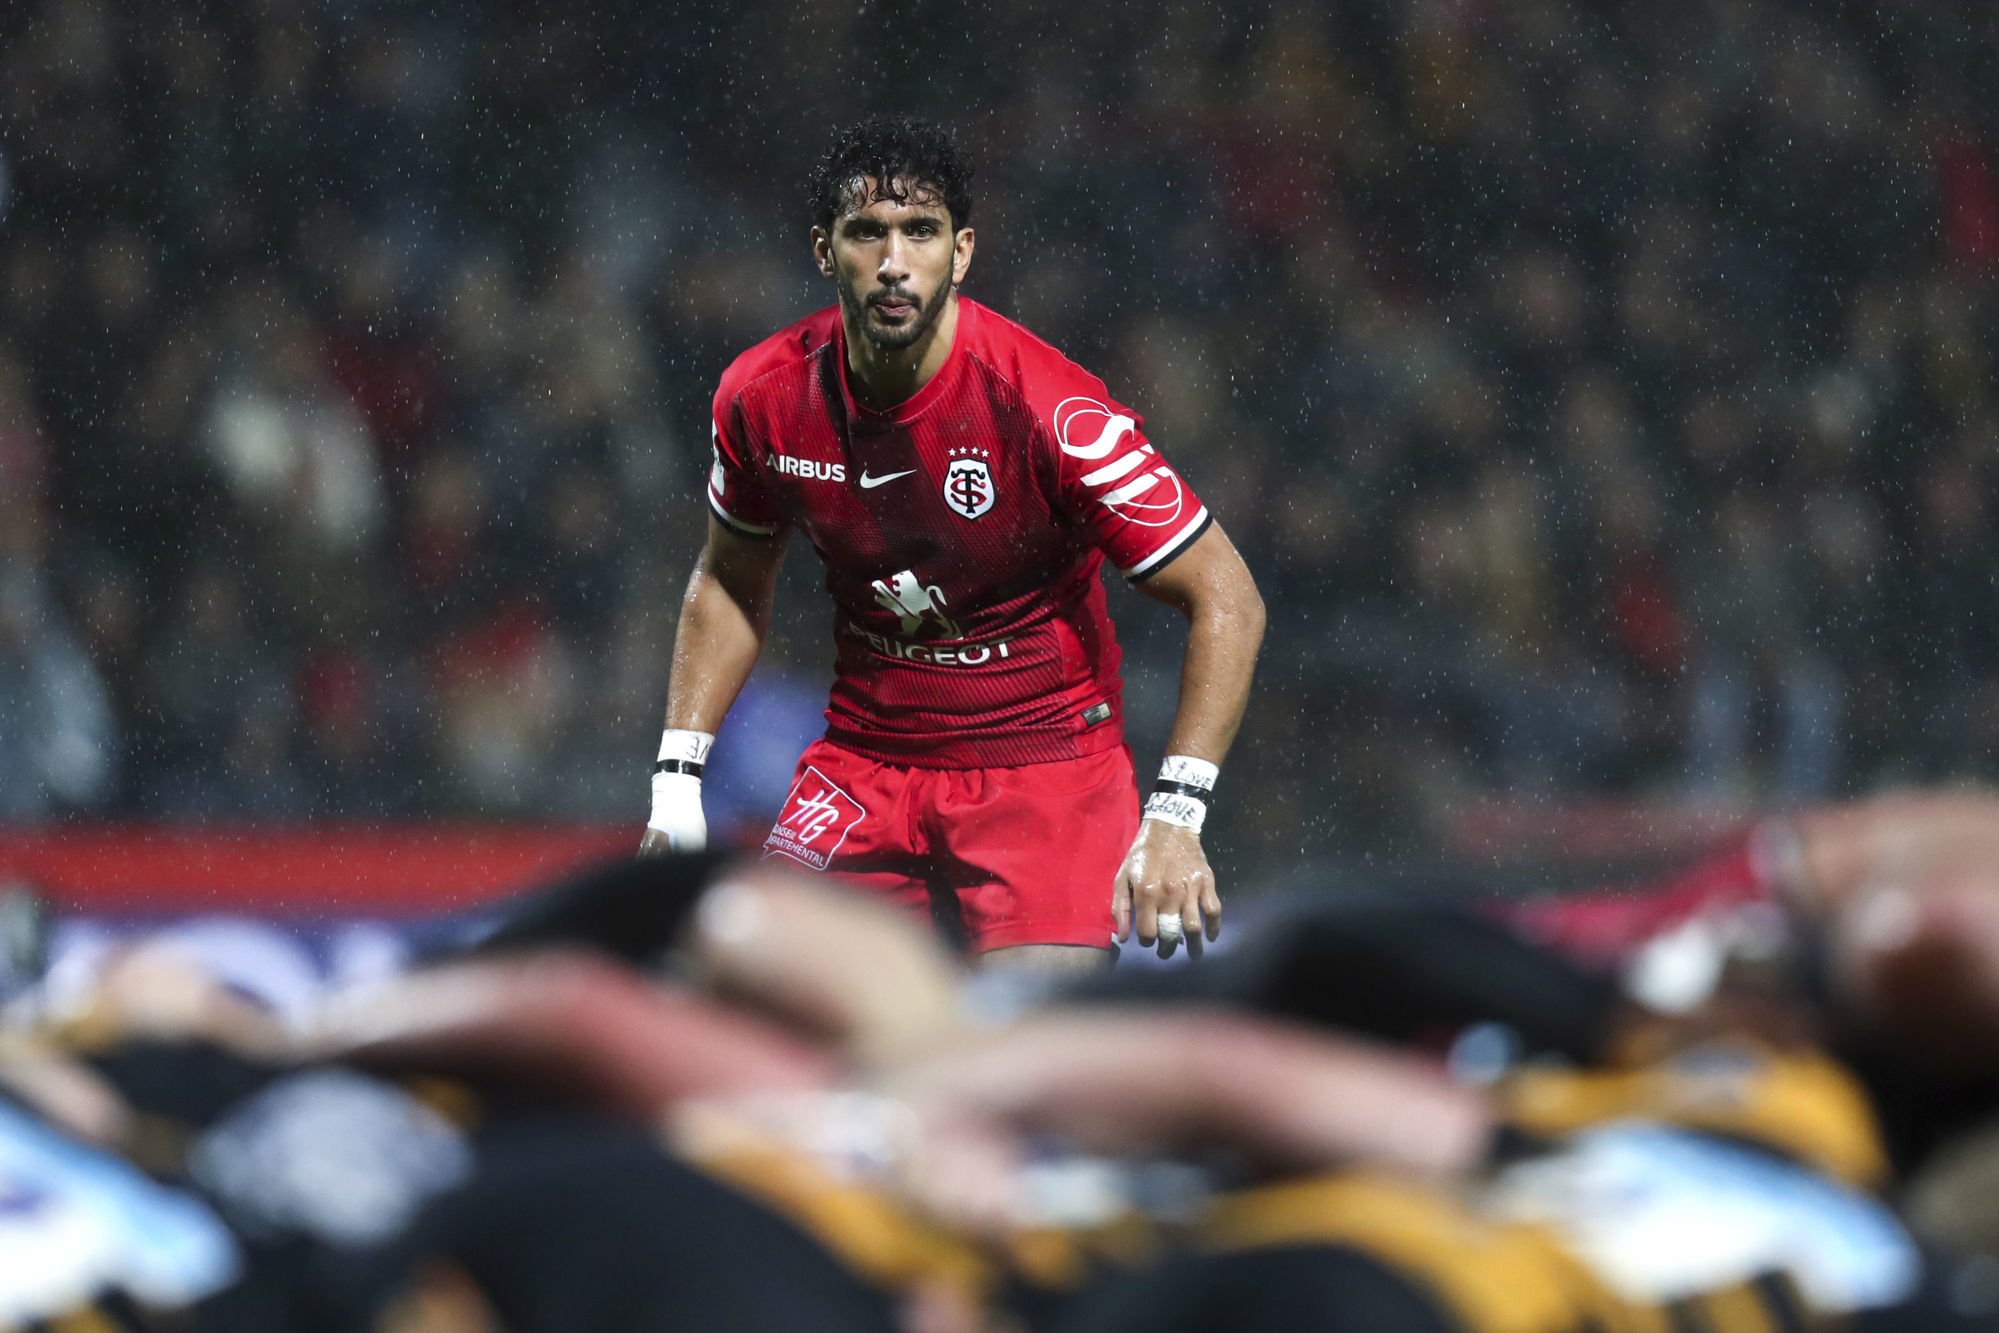 Maxime Mermoz (Photo by Manuel Blondeau/Icon Sport)